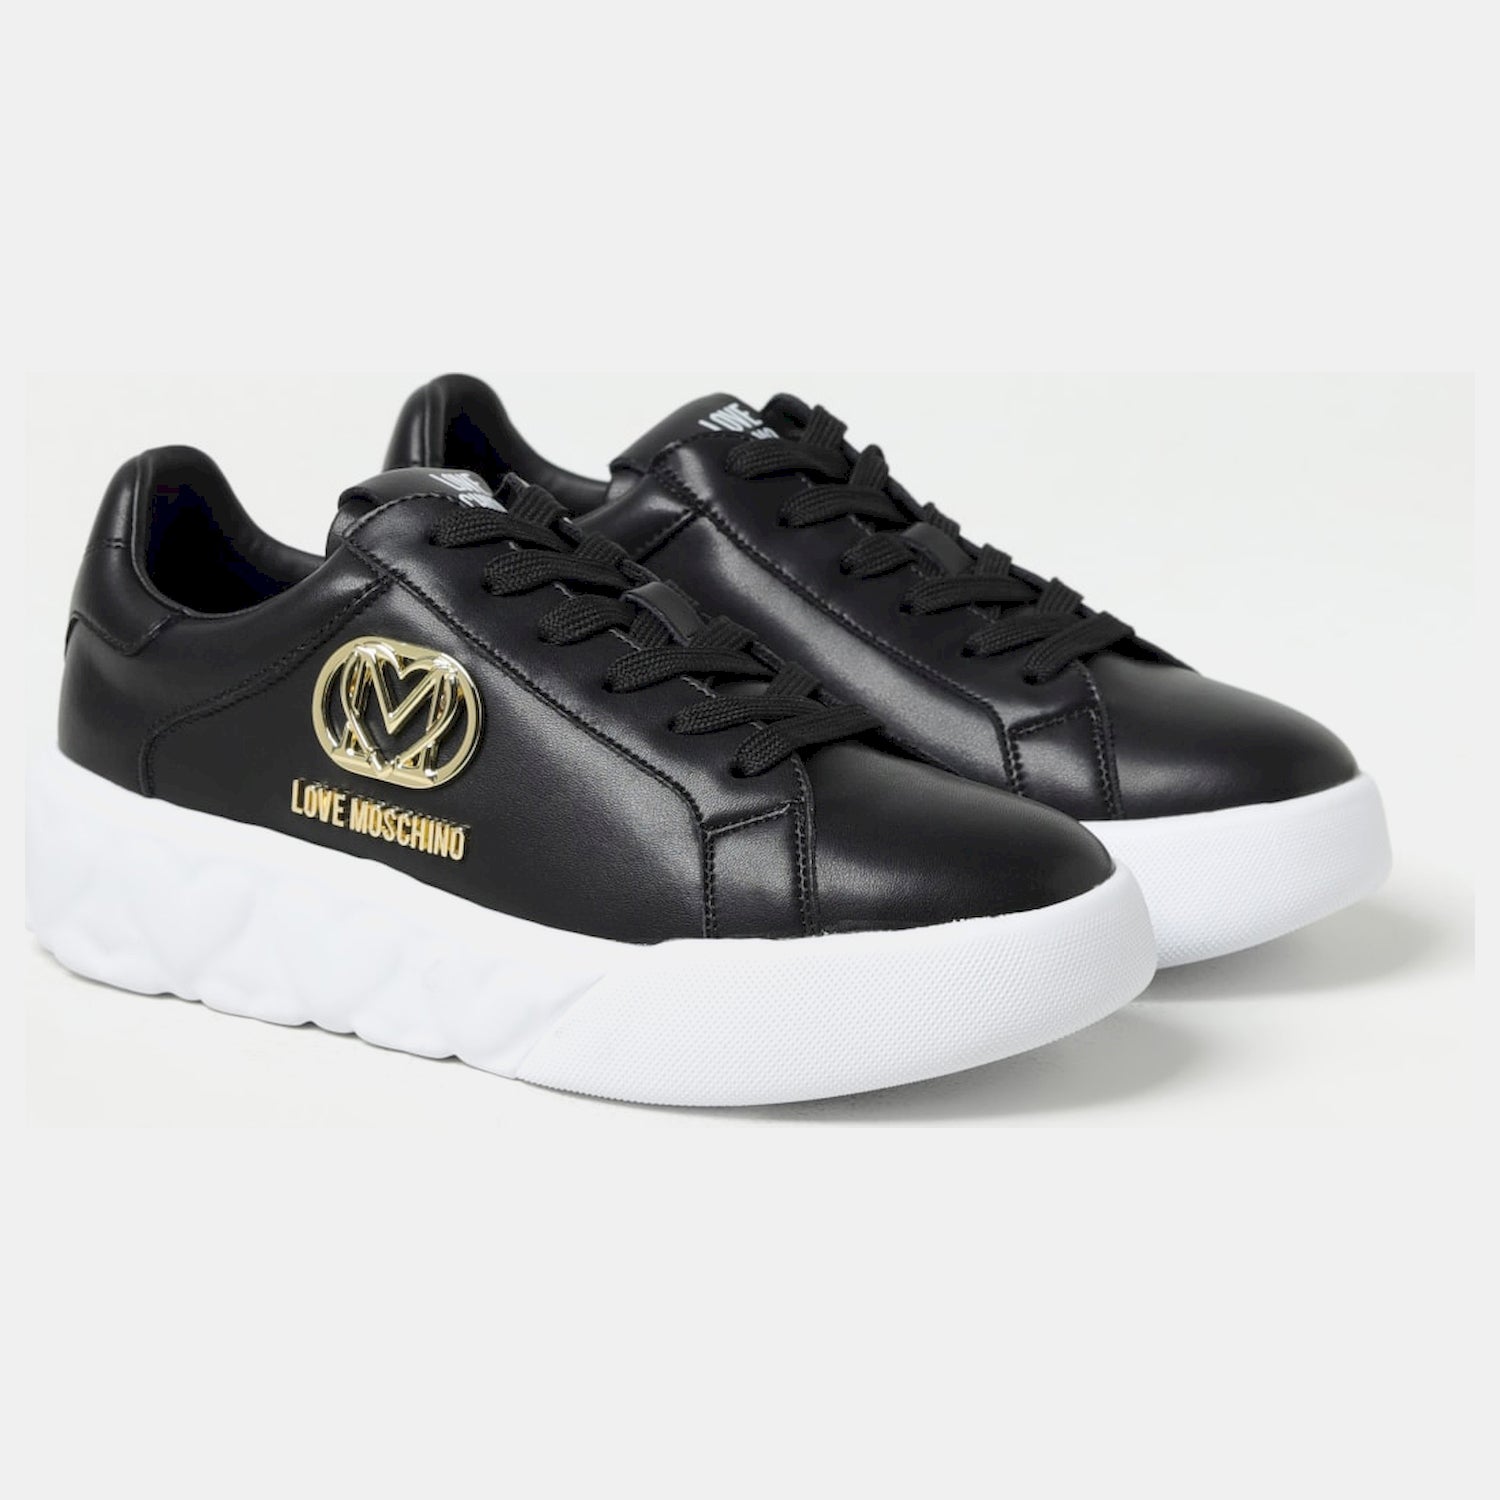 Moschino Sapatilhas Sneakers Shoes Ja15914 Blk Gold Preto Ouro_shot2